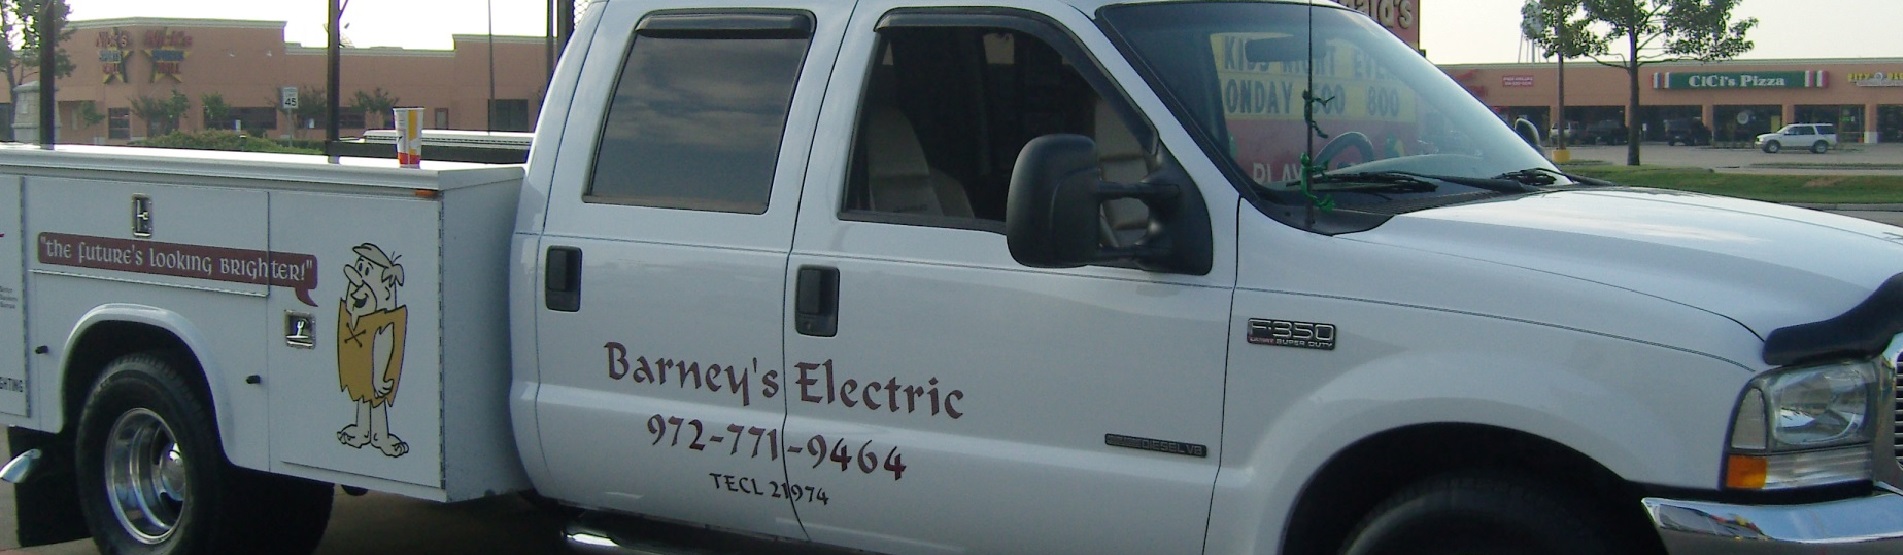 Electrician Garland TX Barney's Electric Full Service Electrician Residential Commercial Retail and New Construction Wiring Repair Installation Service 24 Hour Emergency Services Master Electrician Rockwall Texas